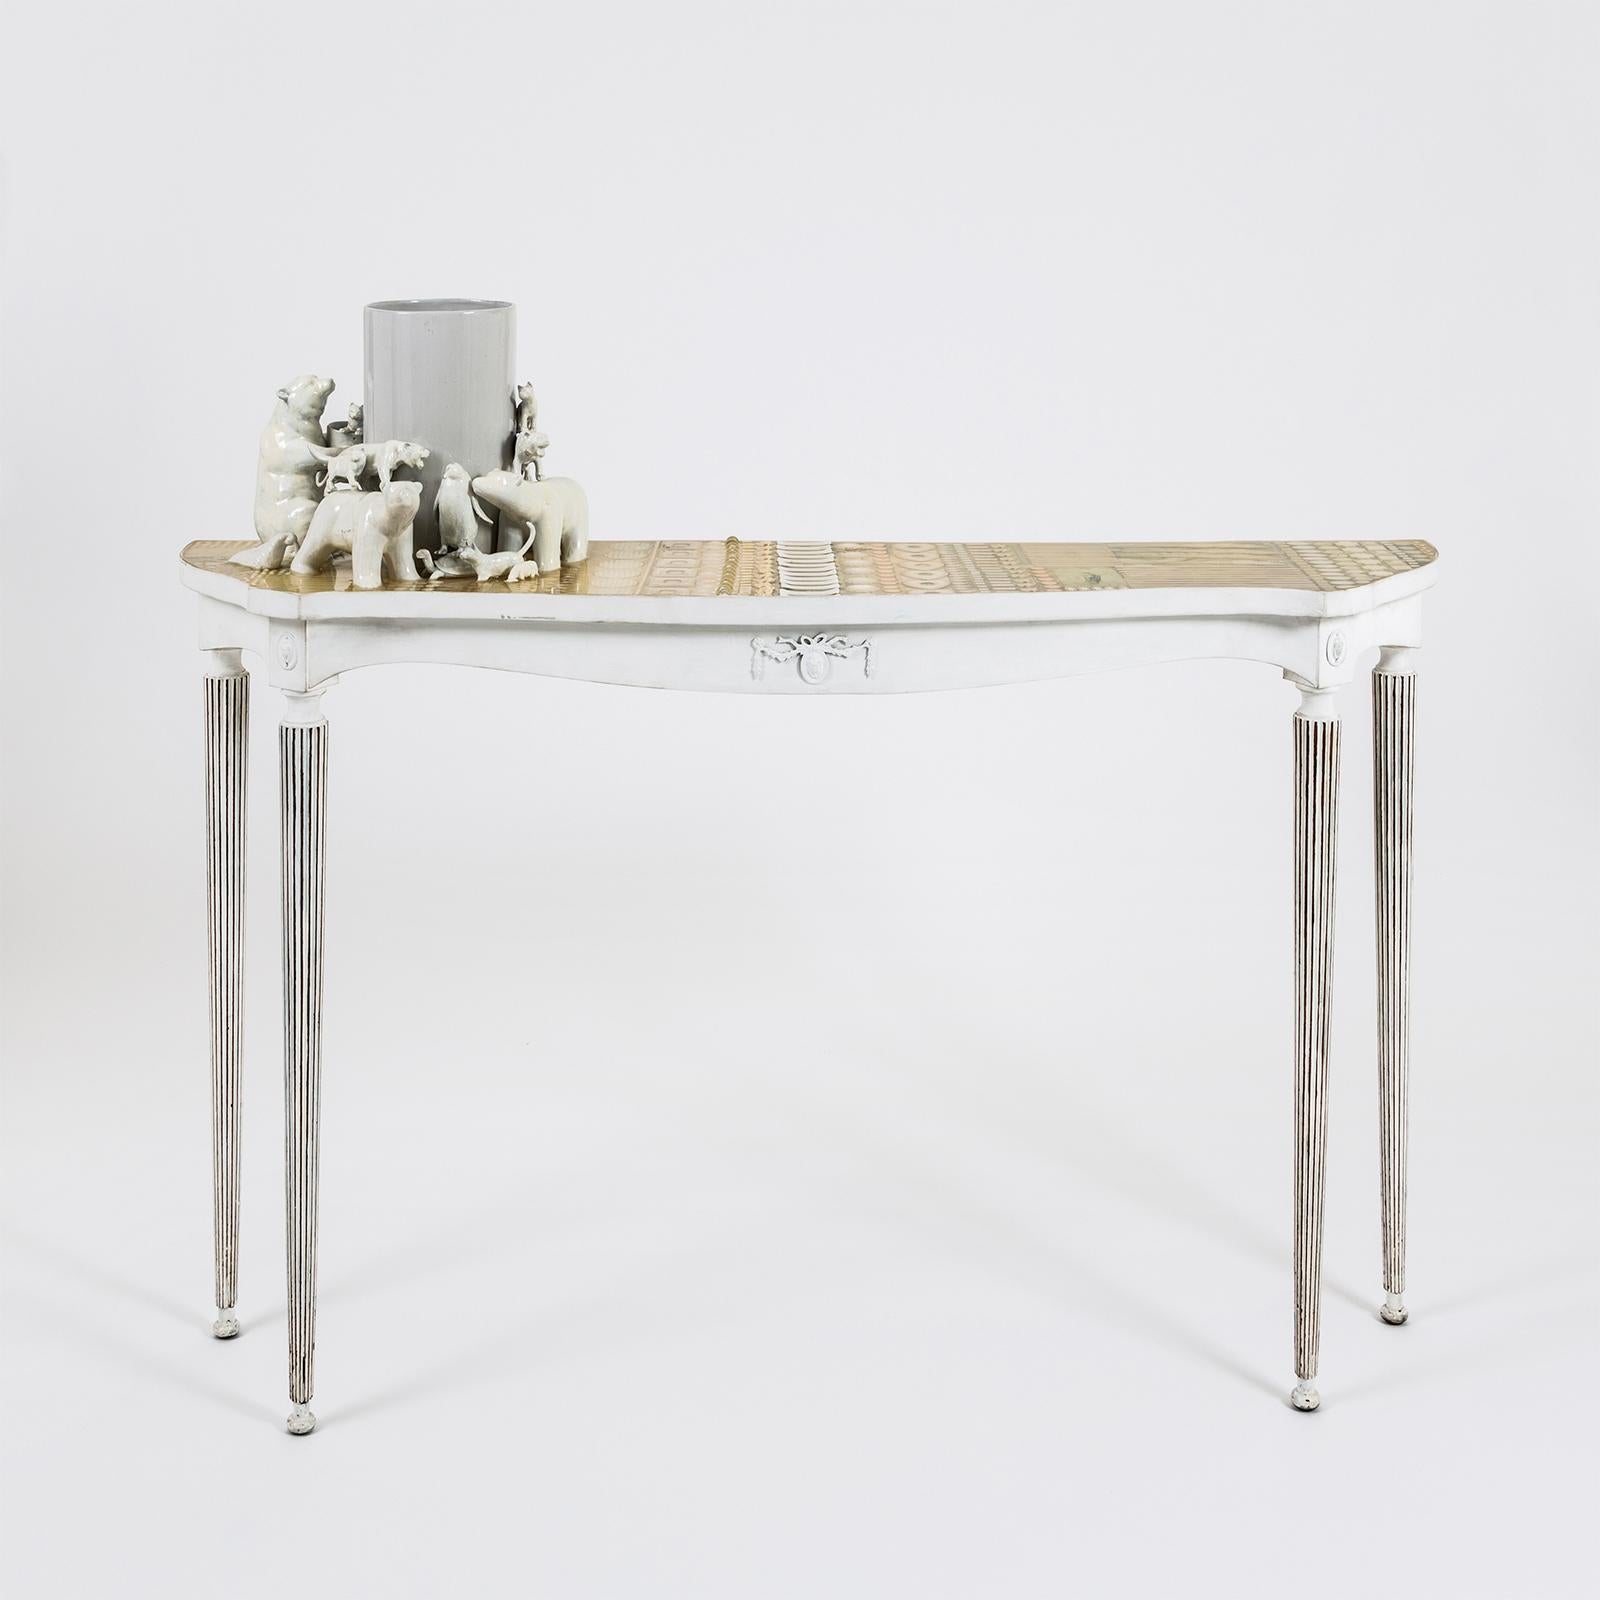 This beautiful console is linked with memories, represented by little objects, images, memorabilia of Emanuela Crotti’s travel around the world, fragments of her life all combined together to creates stunning tableaux vivants which becomes